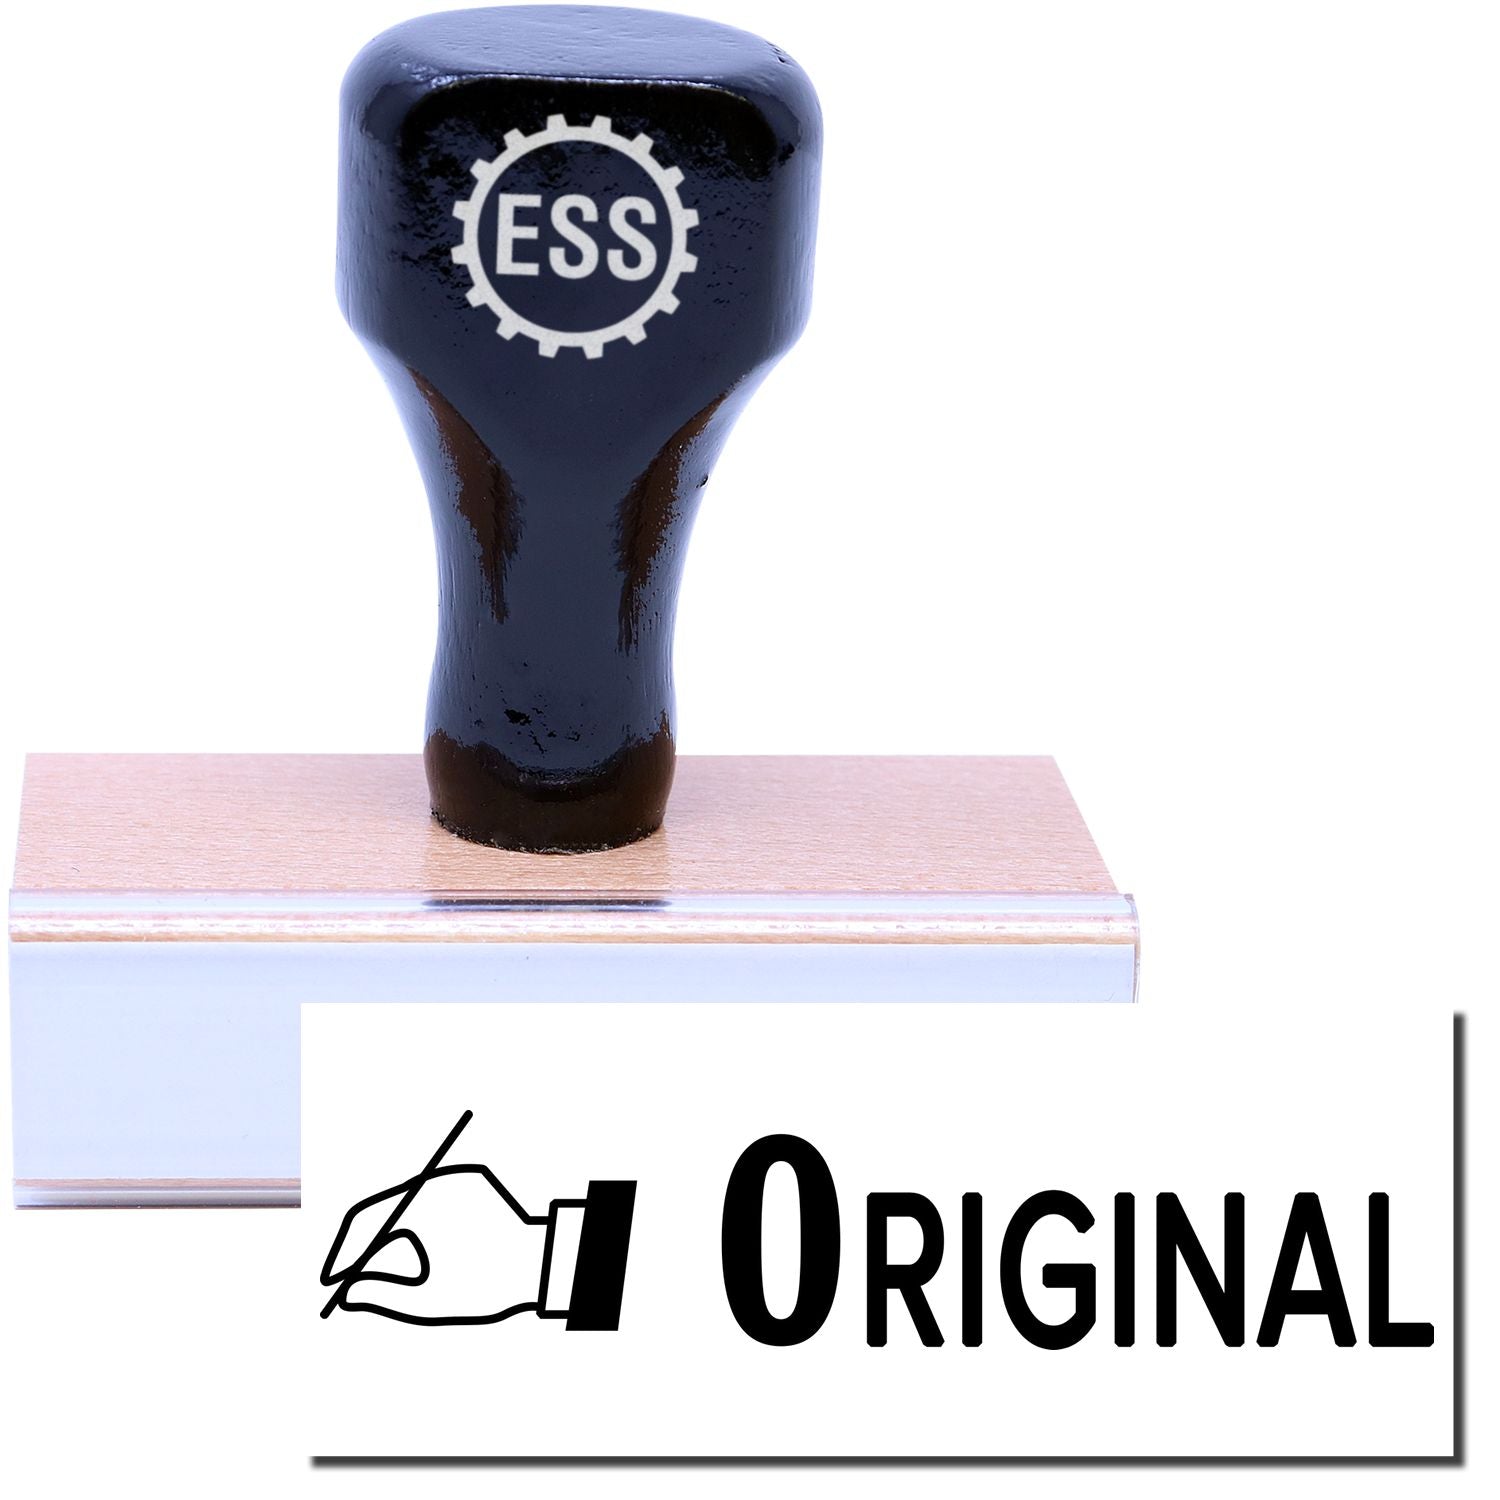 A stock office rubber stamp with a stamped image showing how the text "ORIGINAL" with a small icon of a hand holding a pen is displayed after stamping.